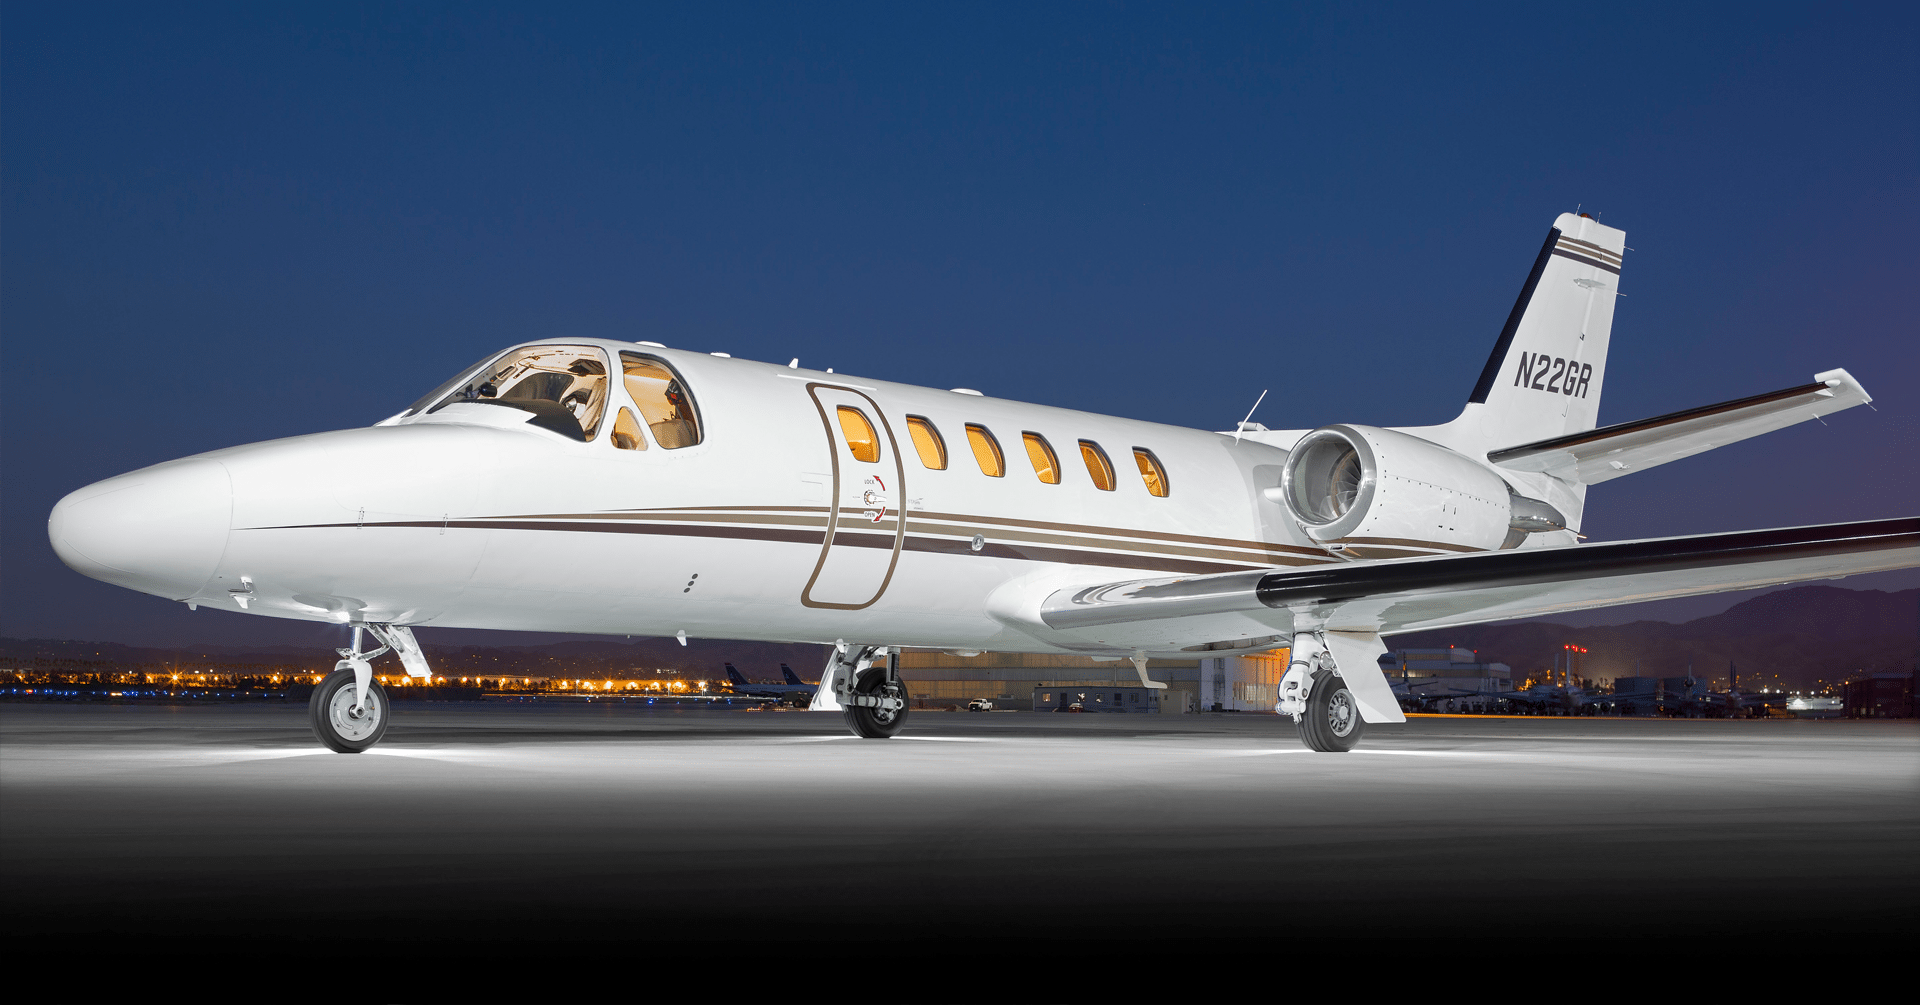 STA Jets Expands Fleet with Addition of Citation Bravo Based at Palm Springs International Airport